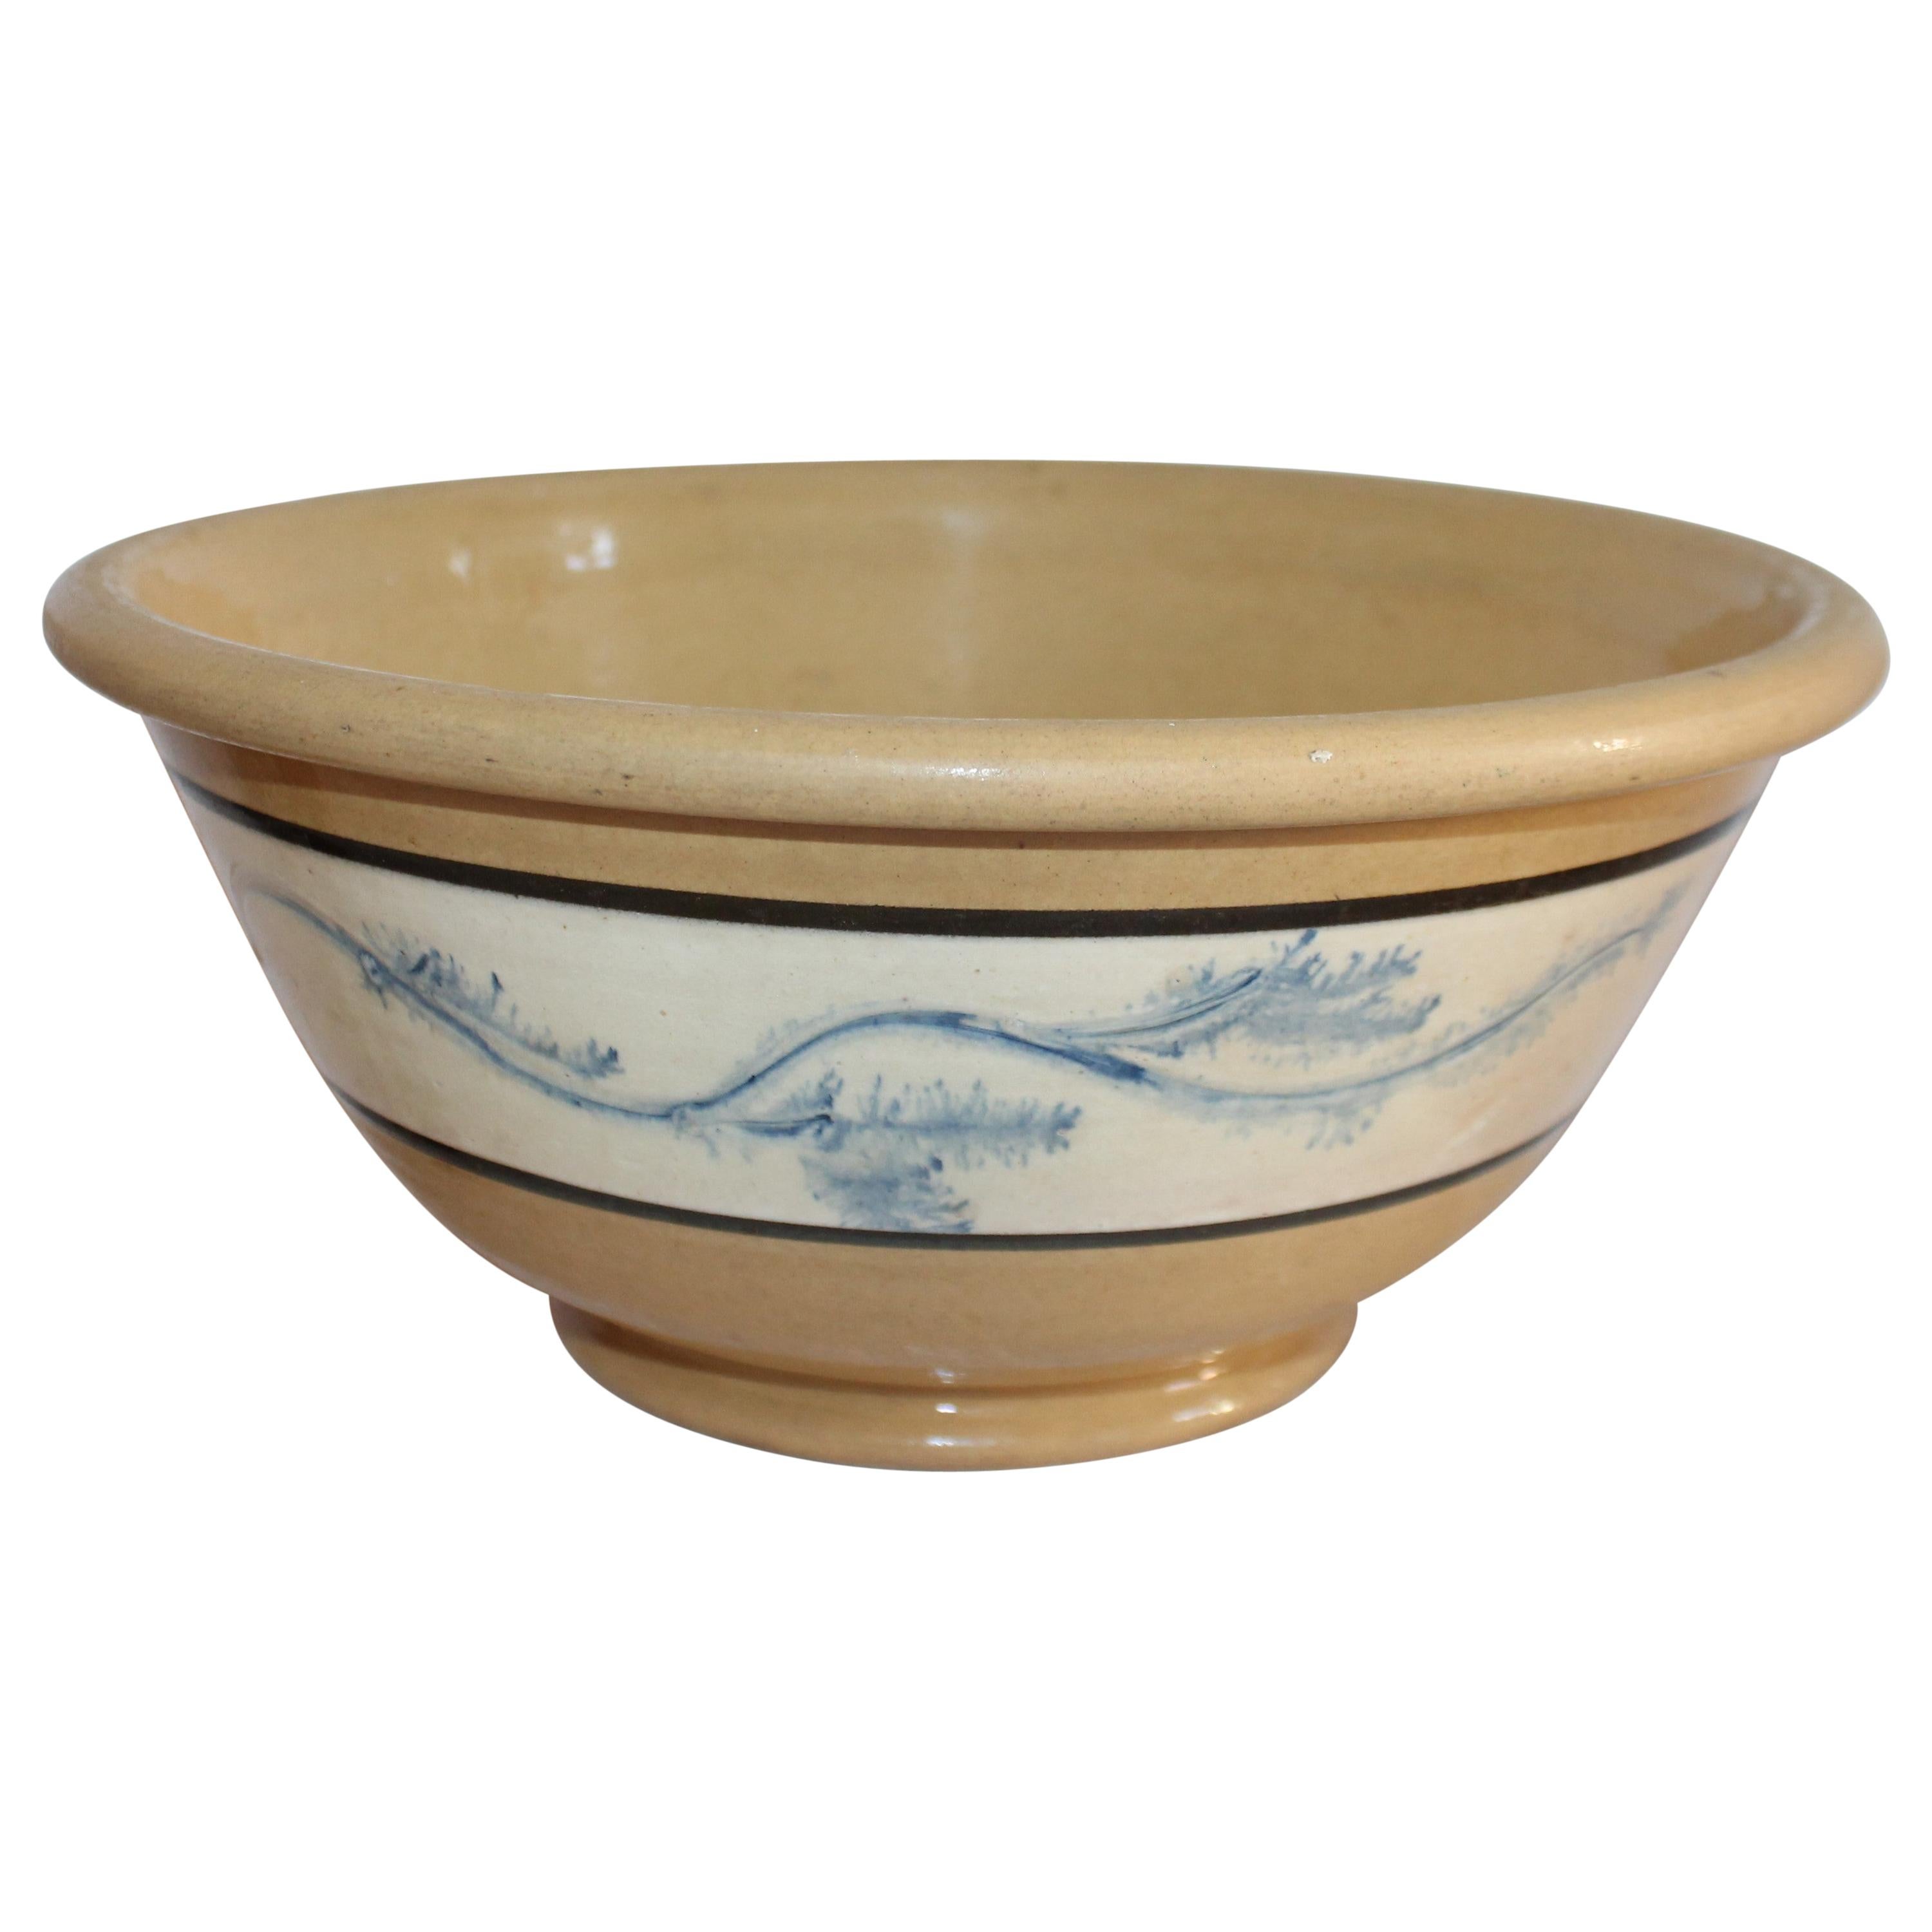 19th Century Mocha Yellow Ware Mixing Bowl with Blue Seaweed For Sale